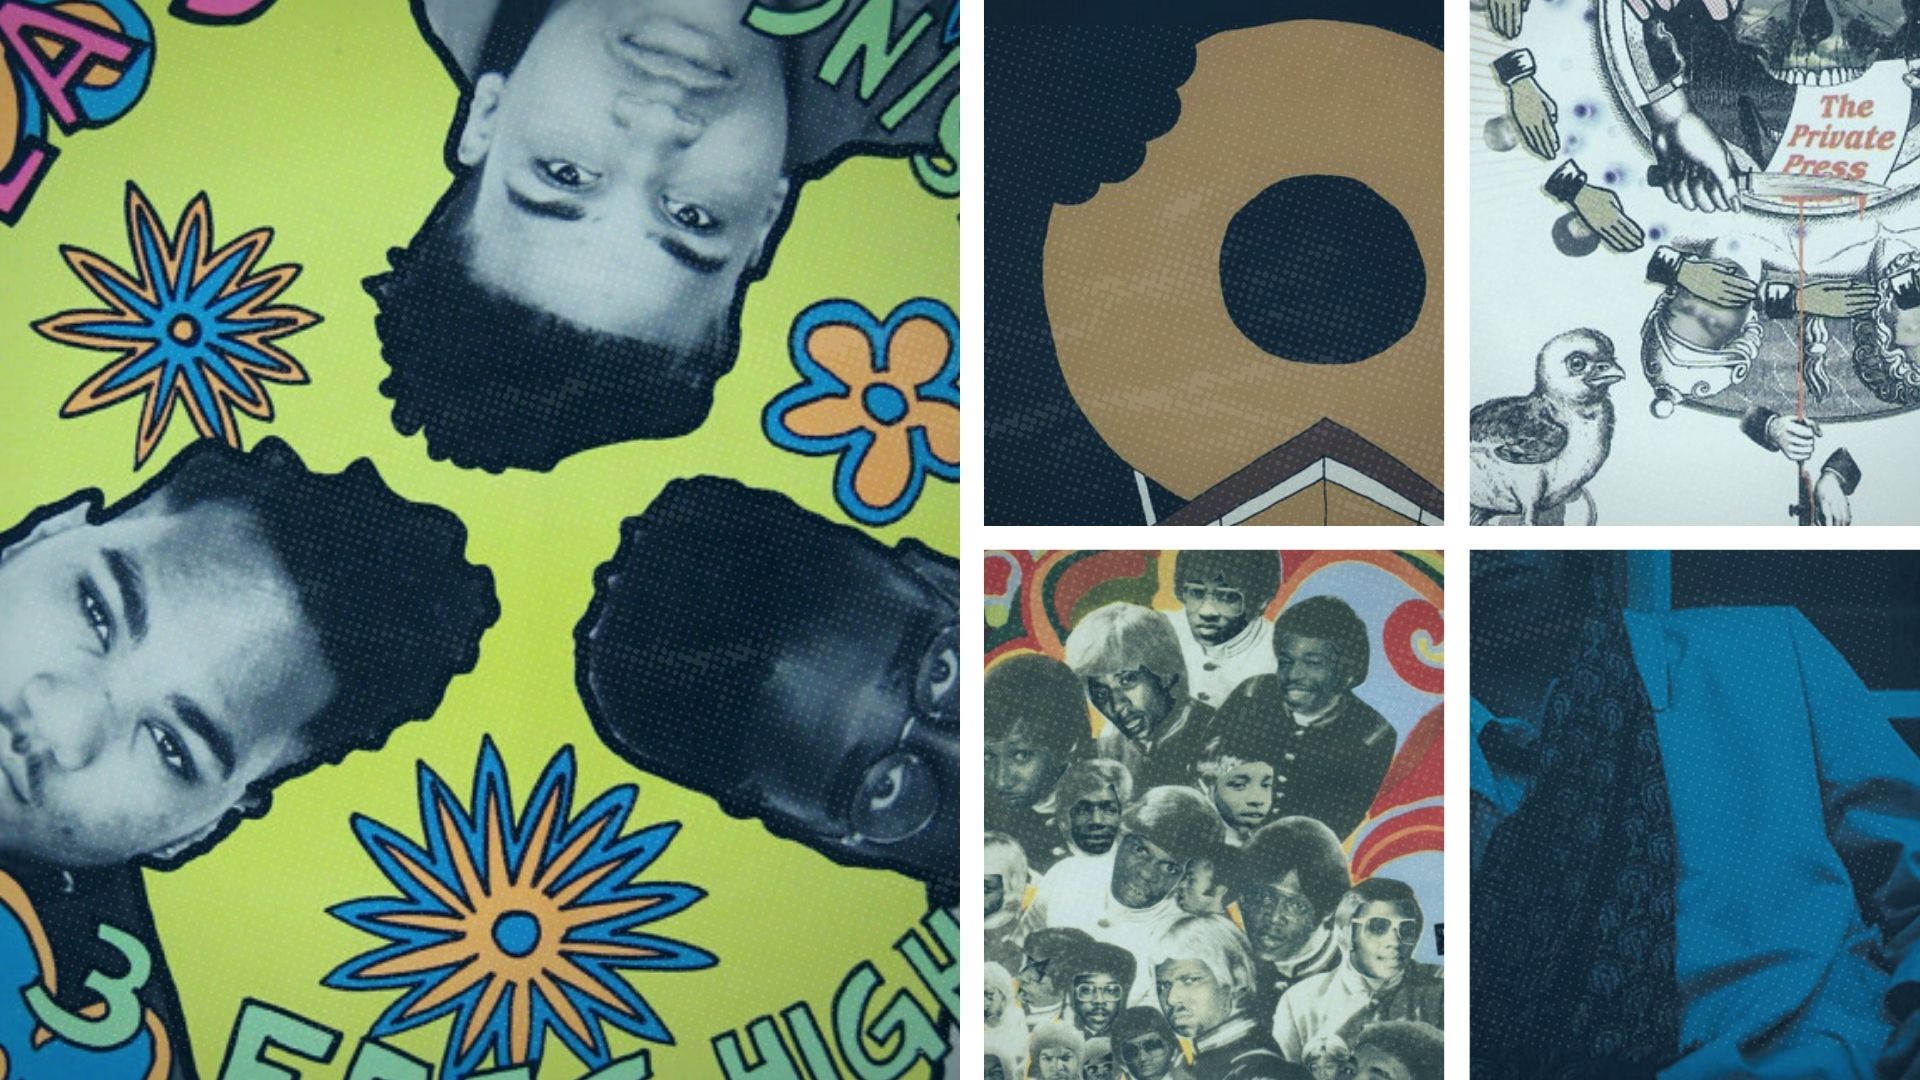 If You Like 3 Feet High and Rising by De La Soul, Listen to These 4 Albums